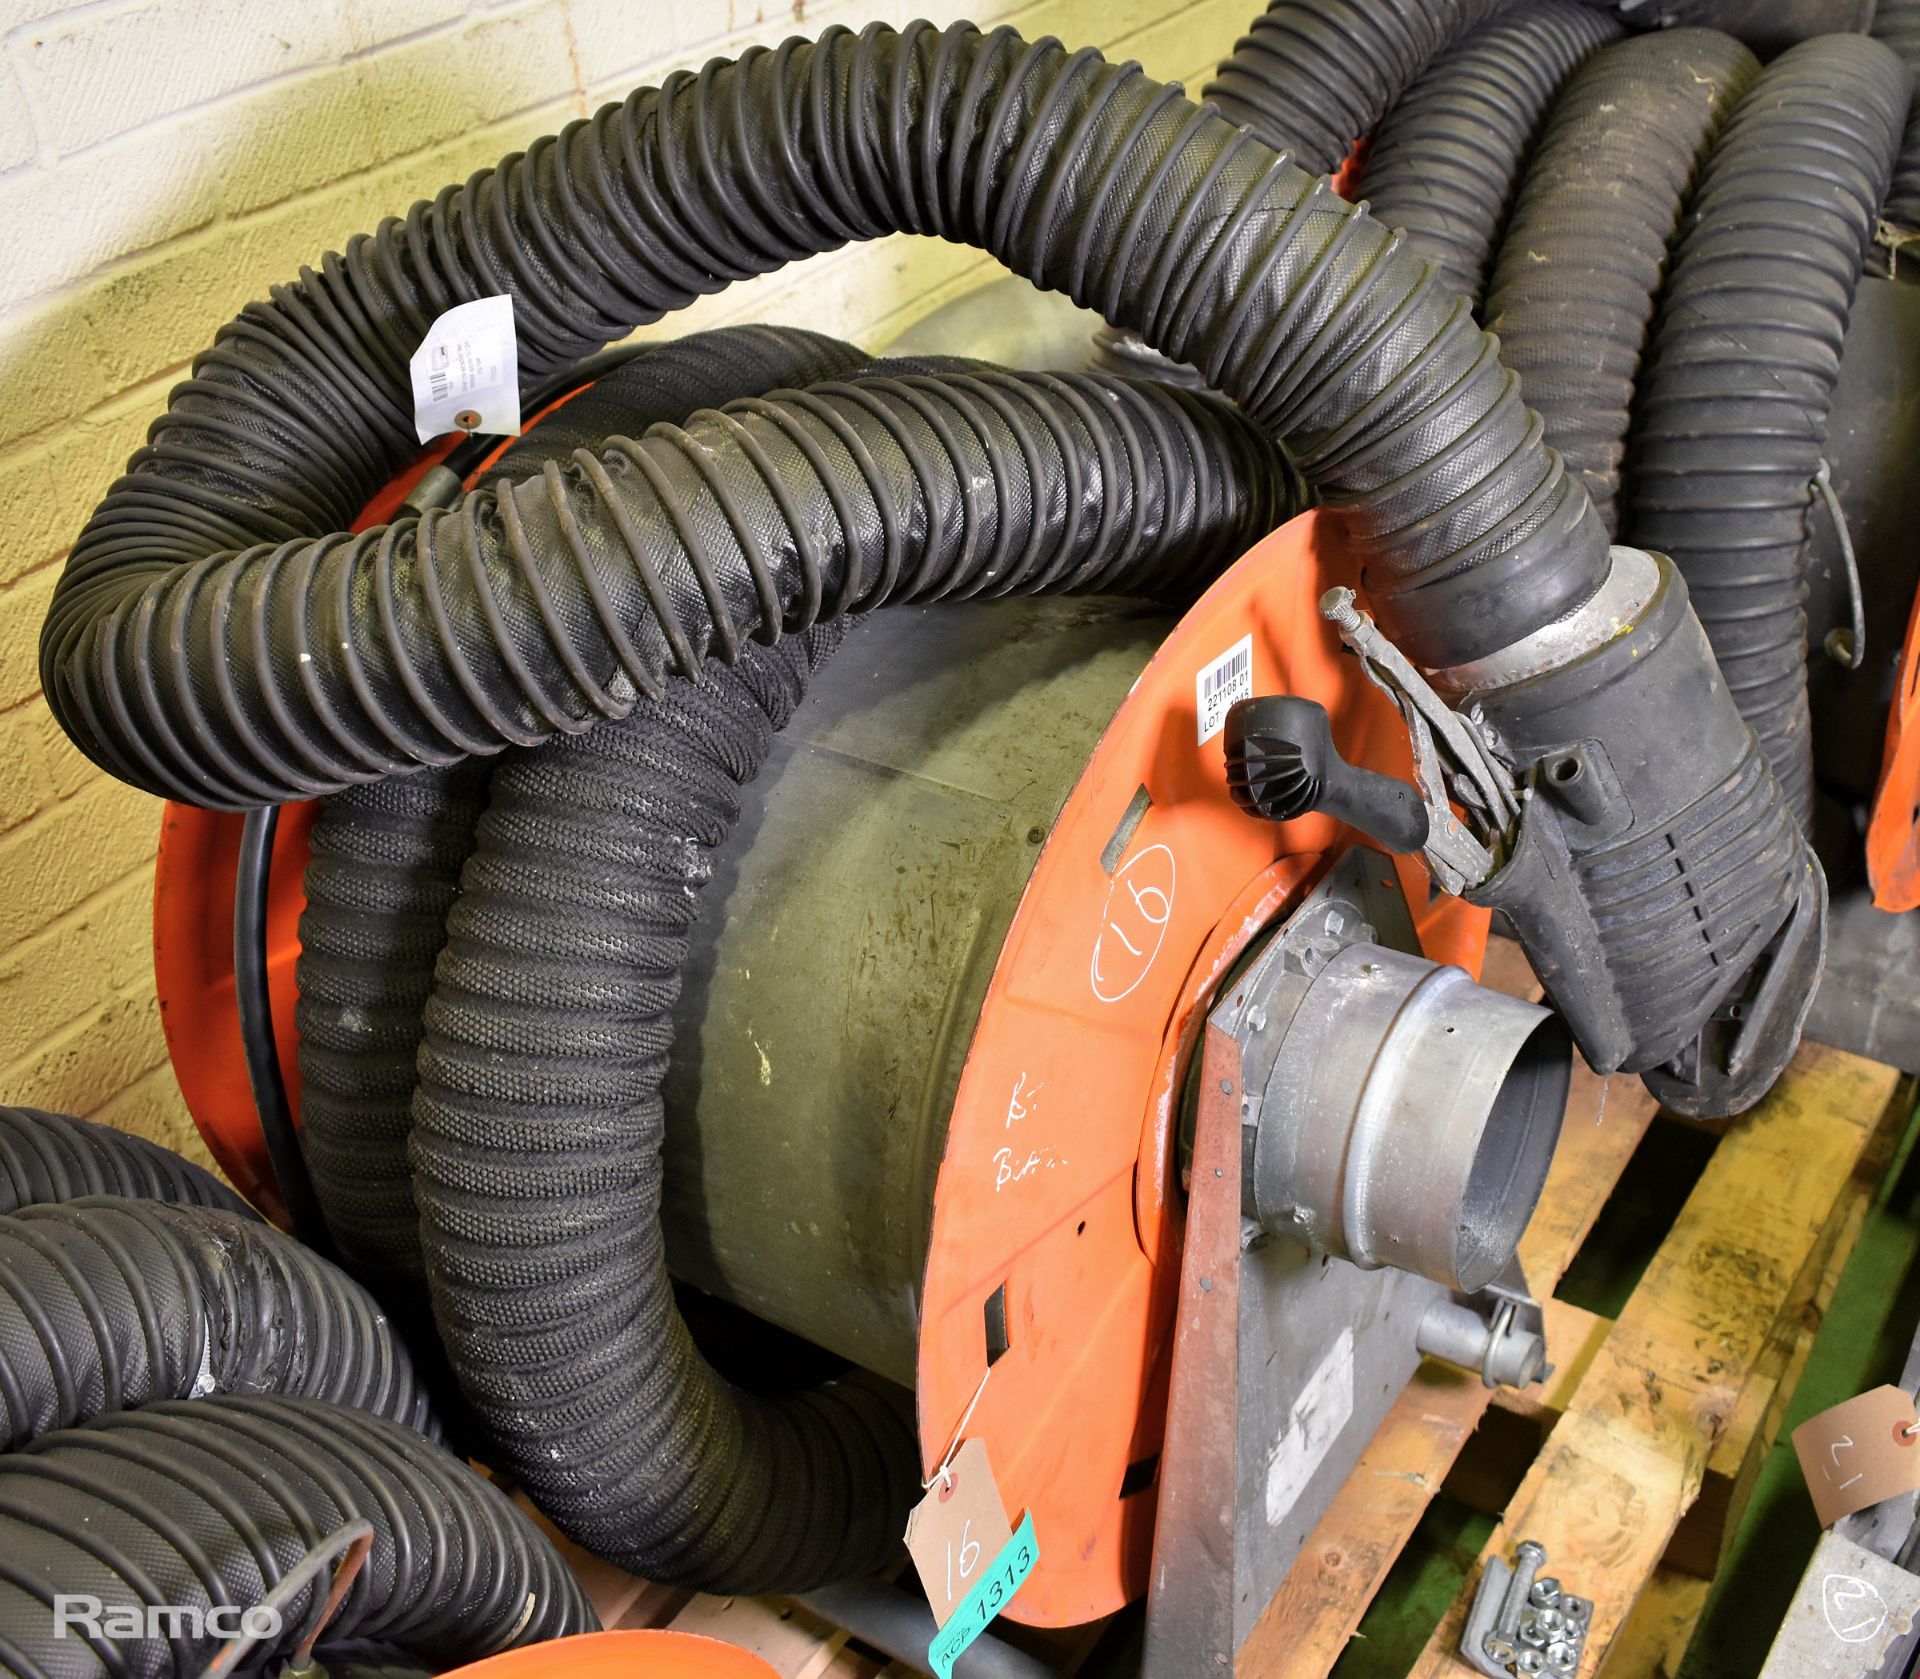 Exhaust fume extraction reel - retractable - approx 10-12m long hose - Image 2 of 4